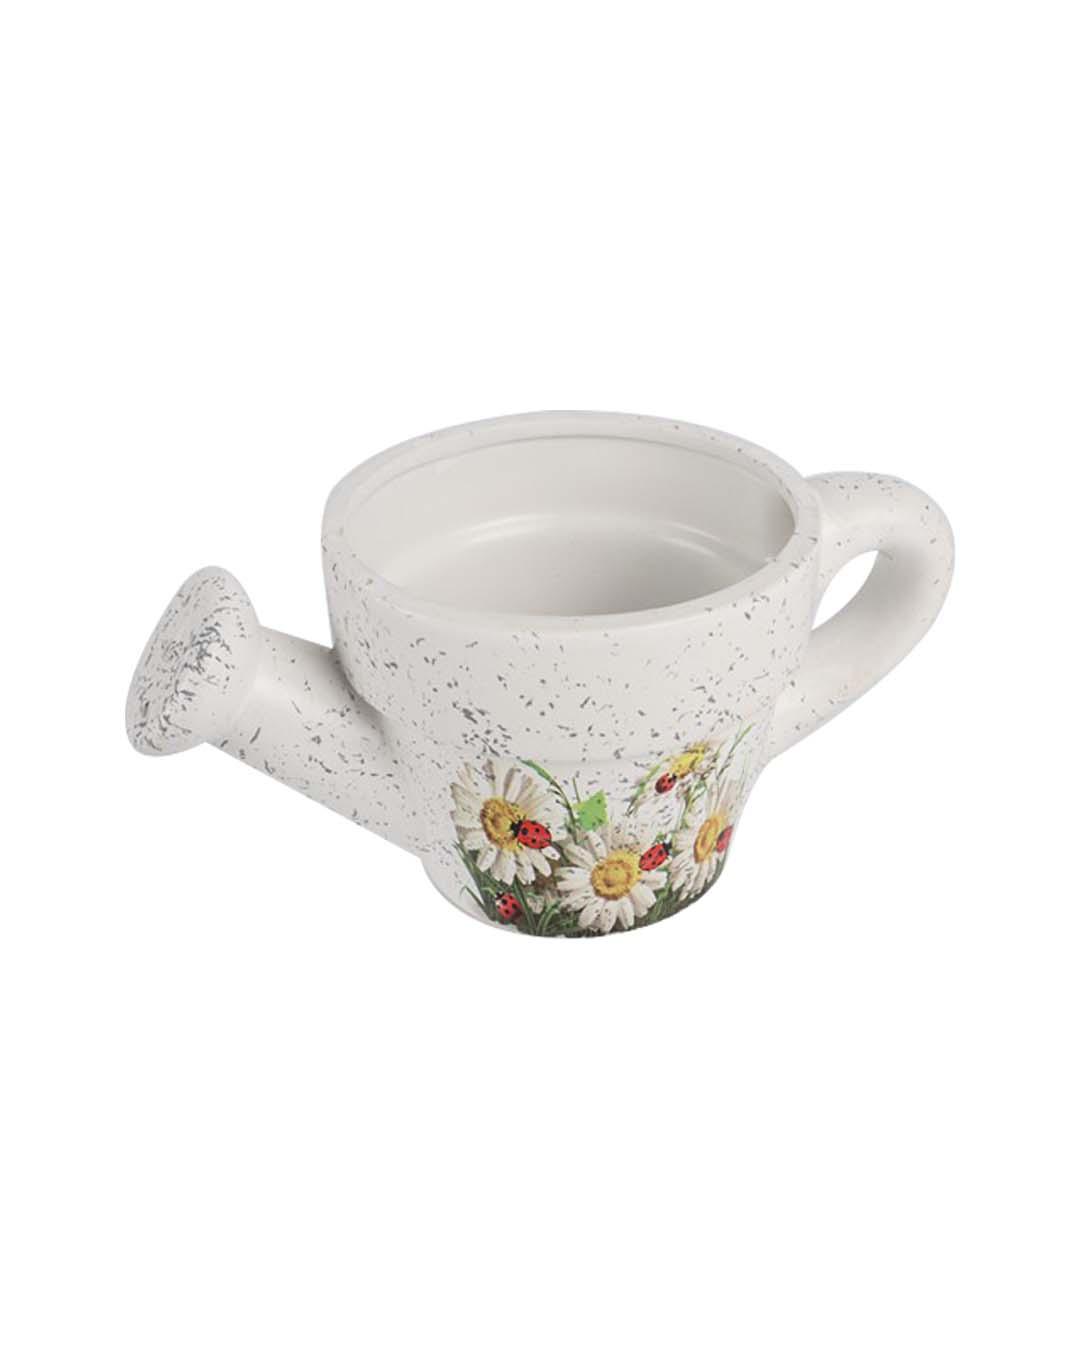 Watering Can Shape Planter, Floral Print, White, Ceramic - MARKET 99